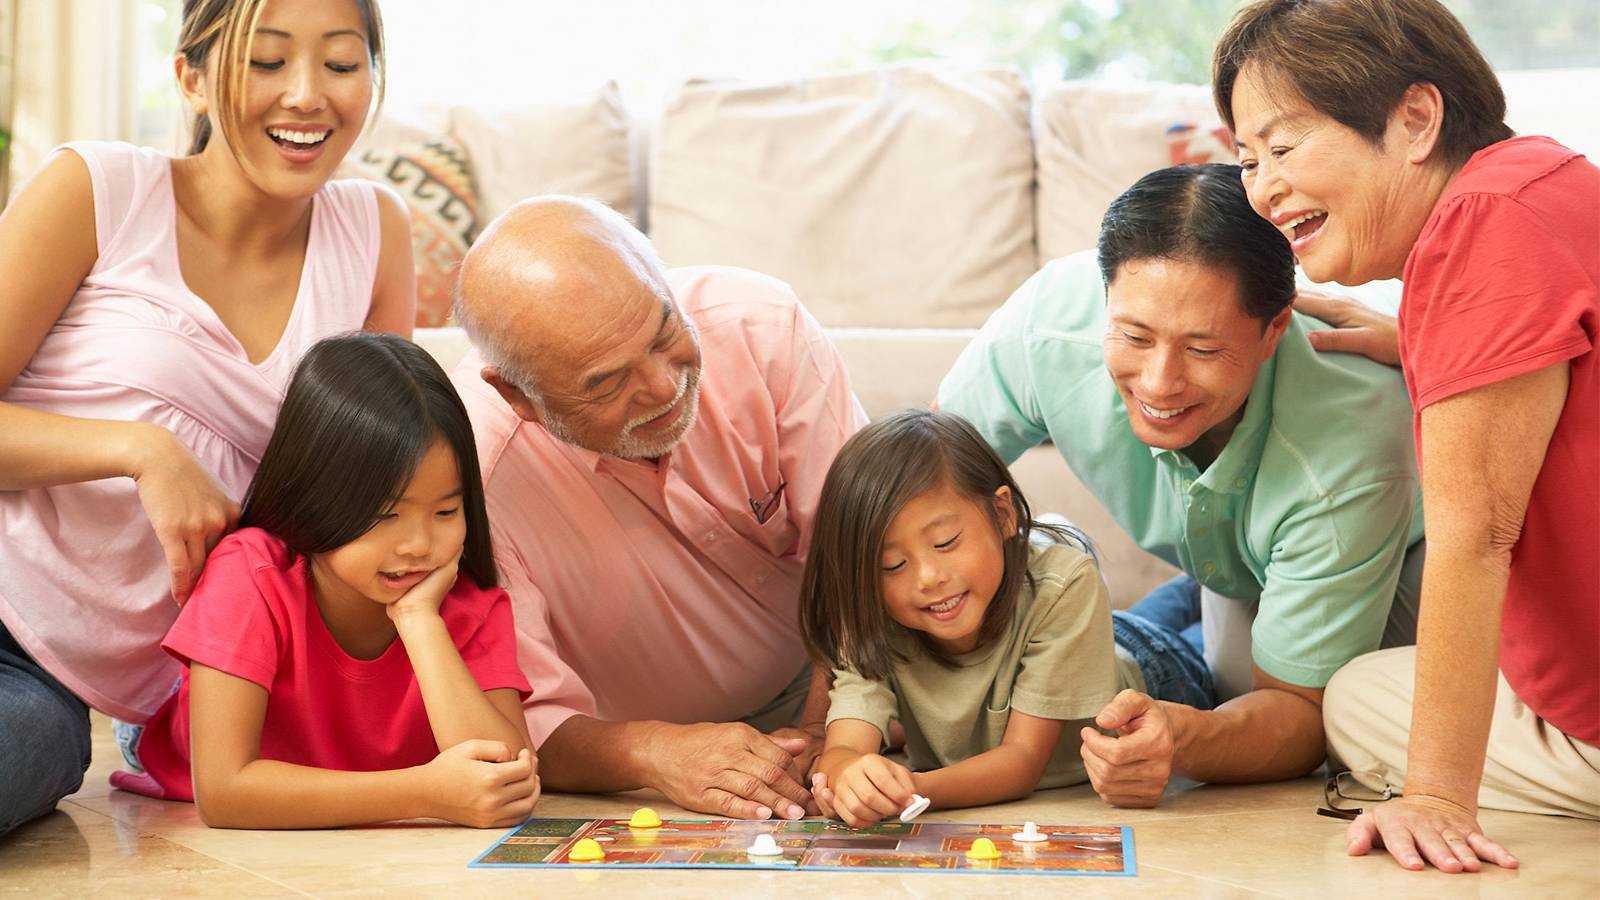 BUYER'S GUIDE Top 10 family board games